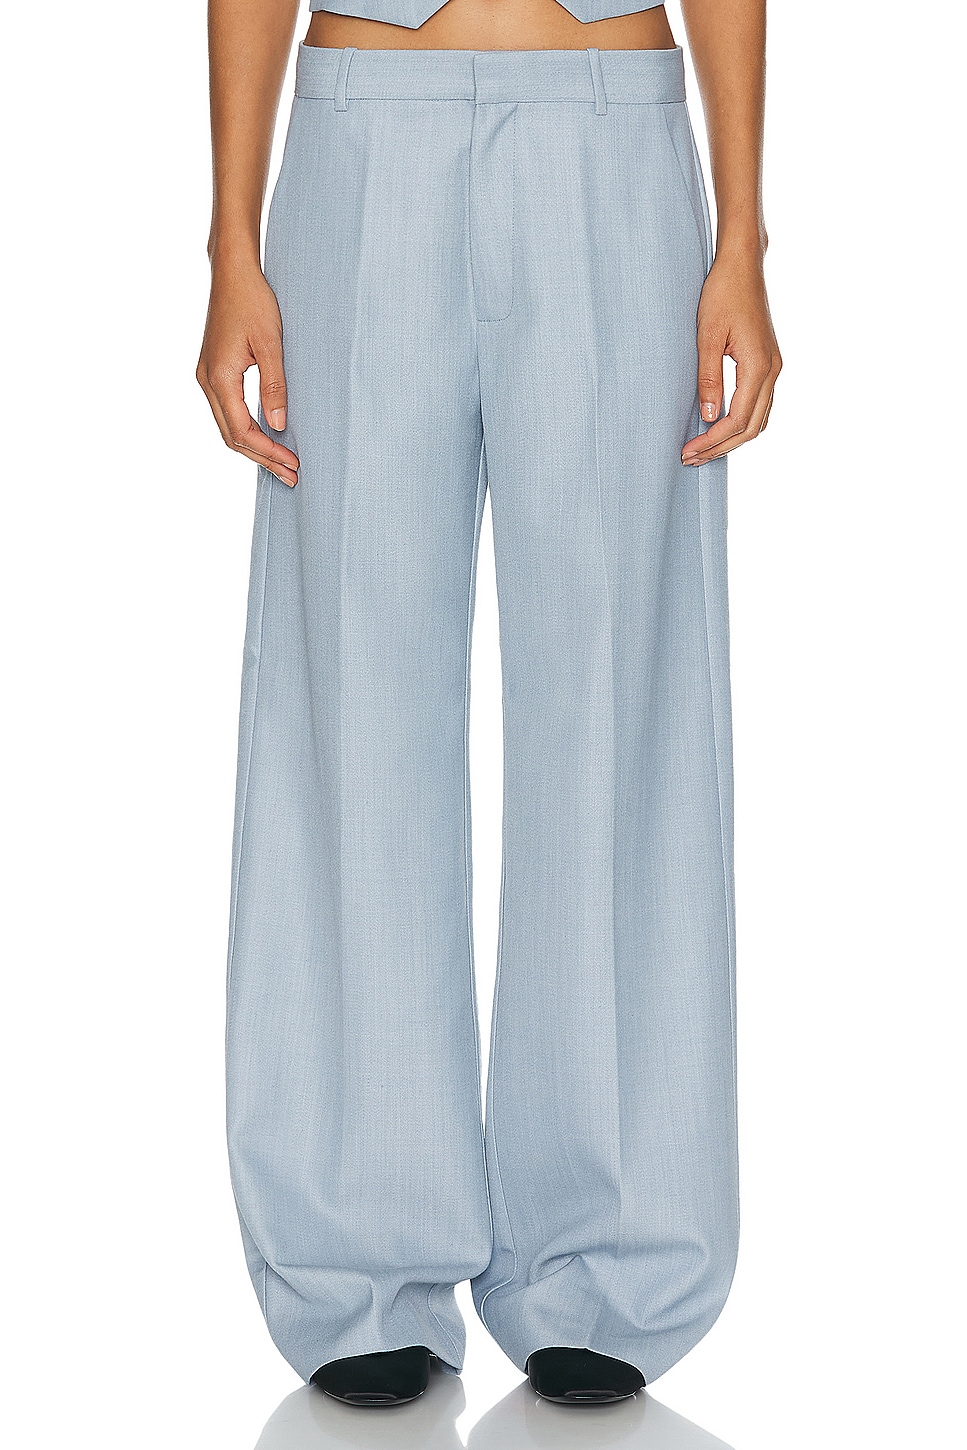 Image 1 of St. Agni Carter Trouser in Stone Blue